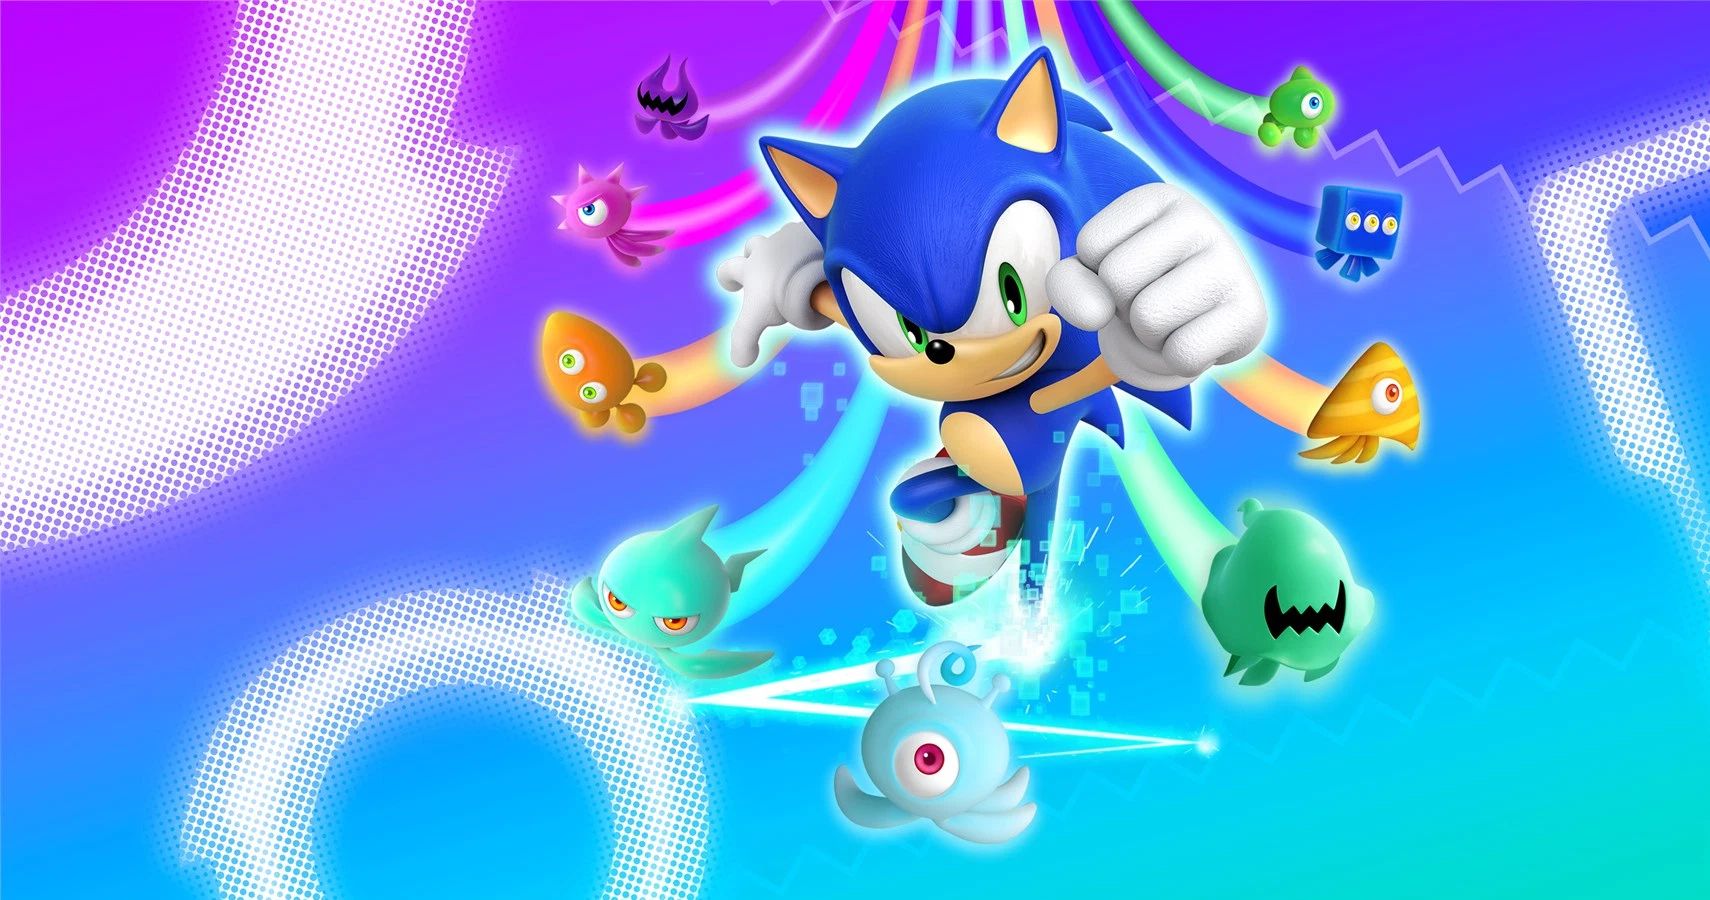 sonic colors ultimate